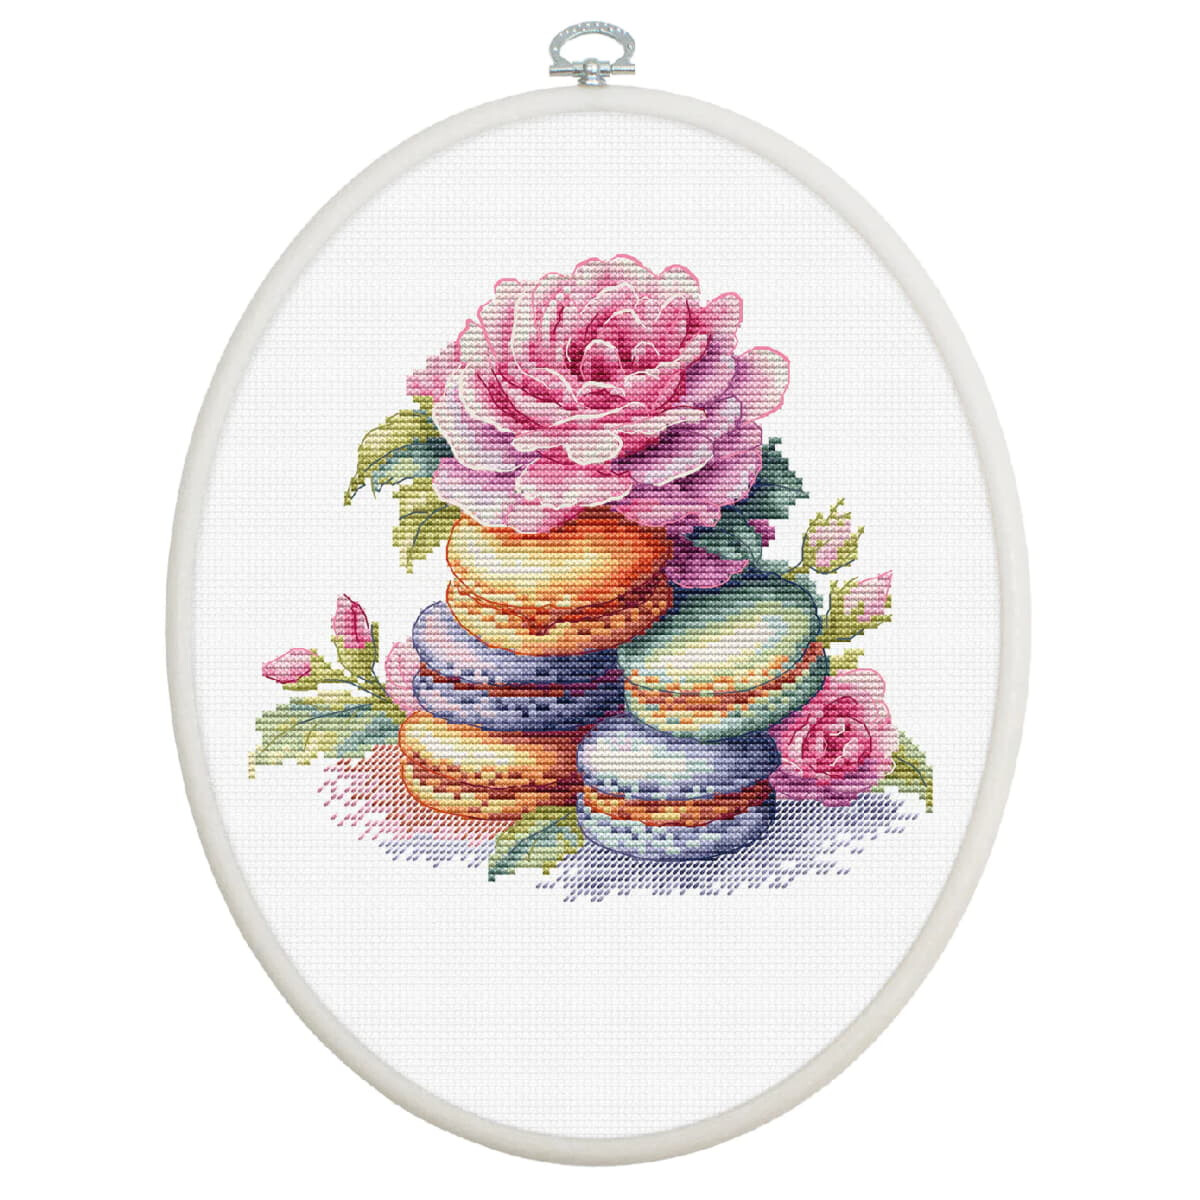 Luca-S counted cross stitch kit with hoop "French...